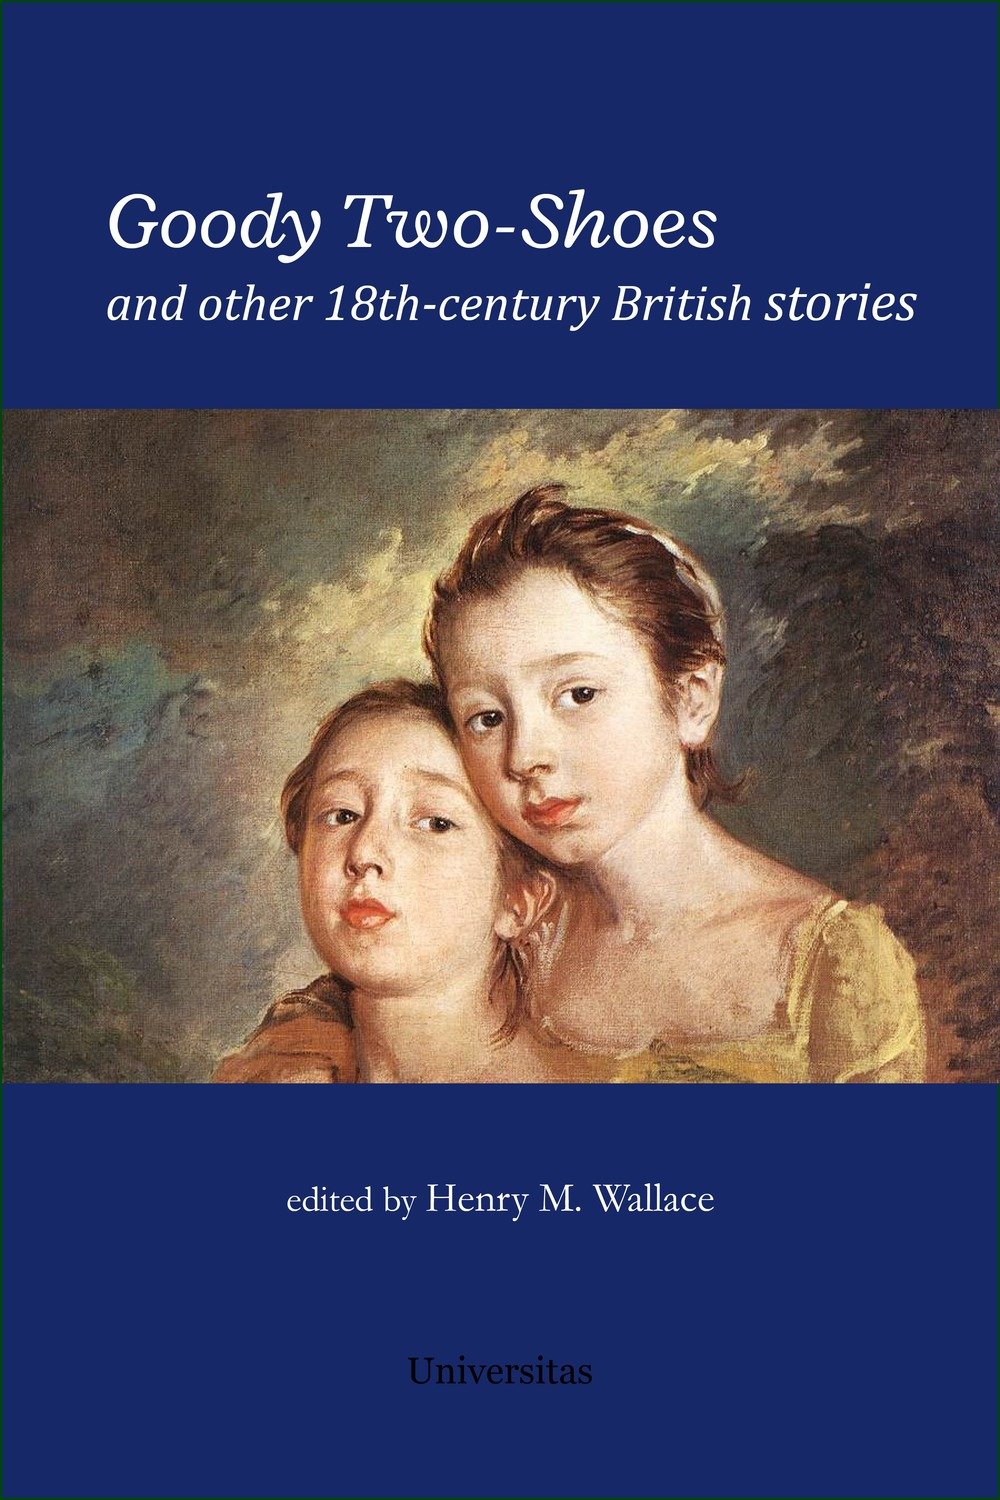 Goody Two-Shoes and other 18th-century British stories